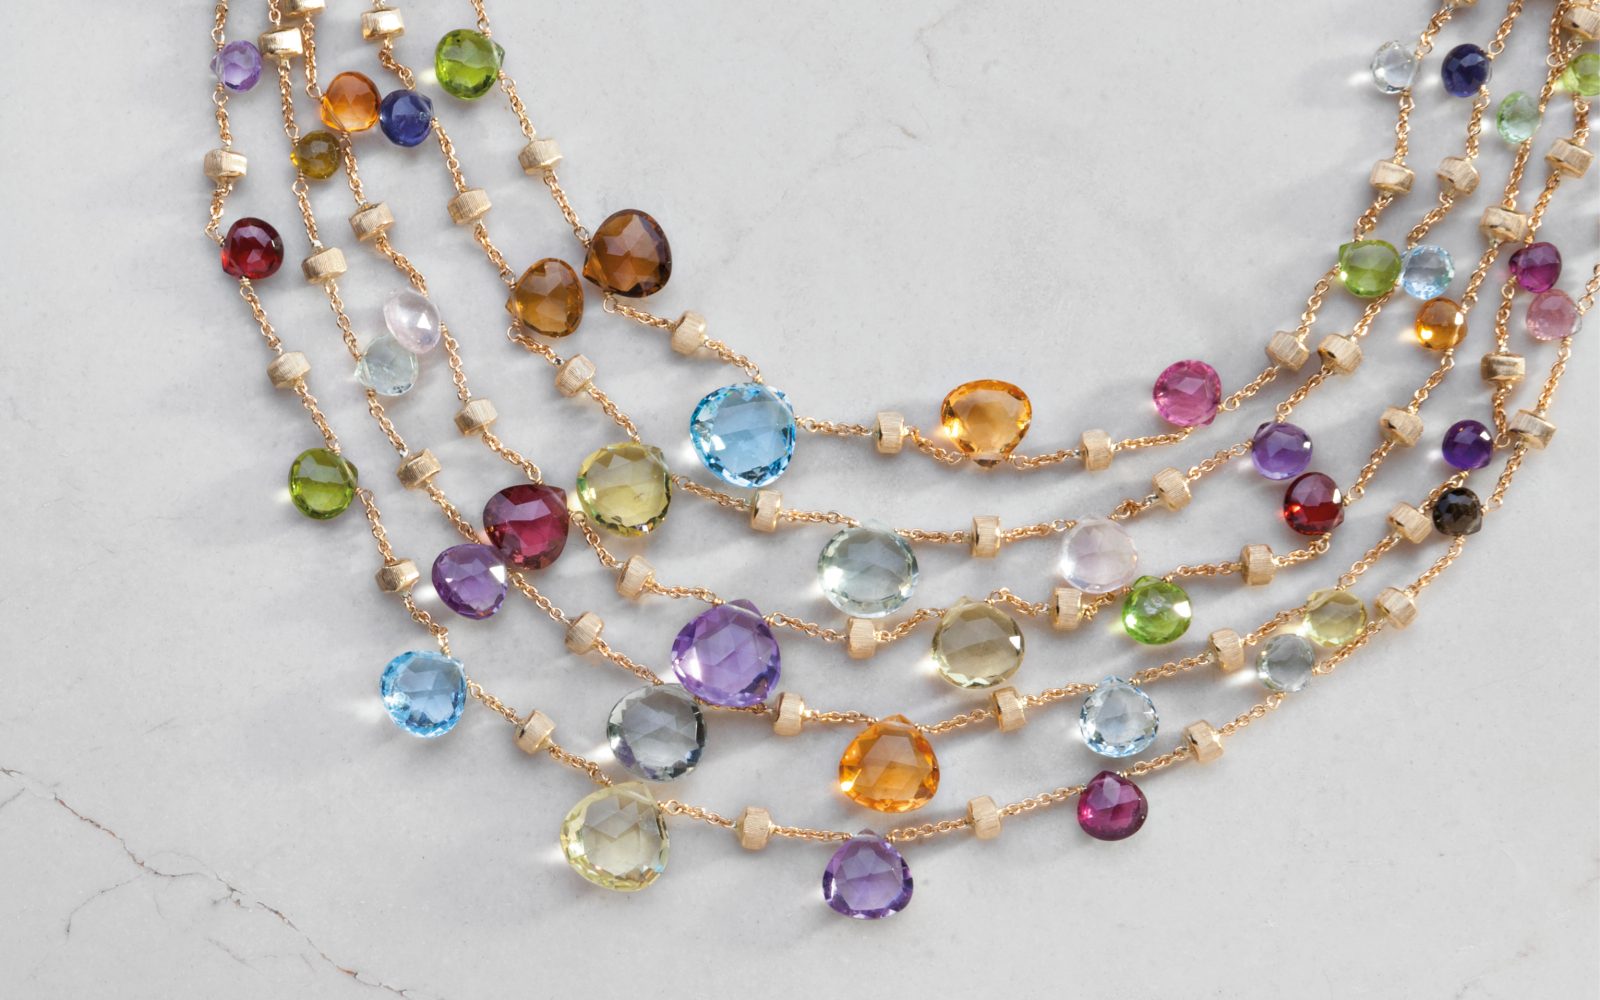 Coloured Gemstones For Every Jewellery Lover